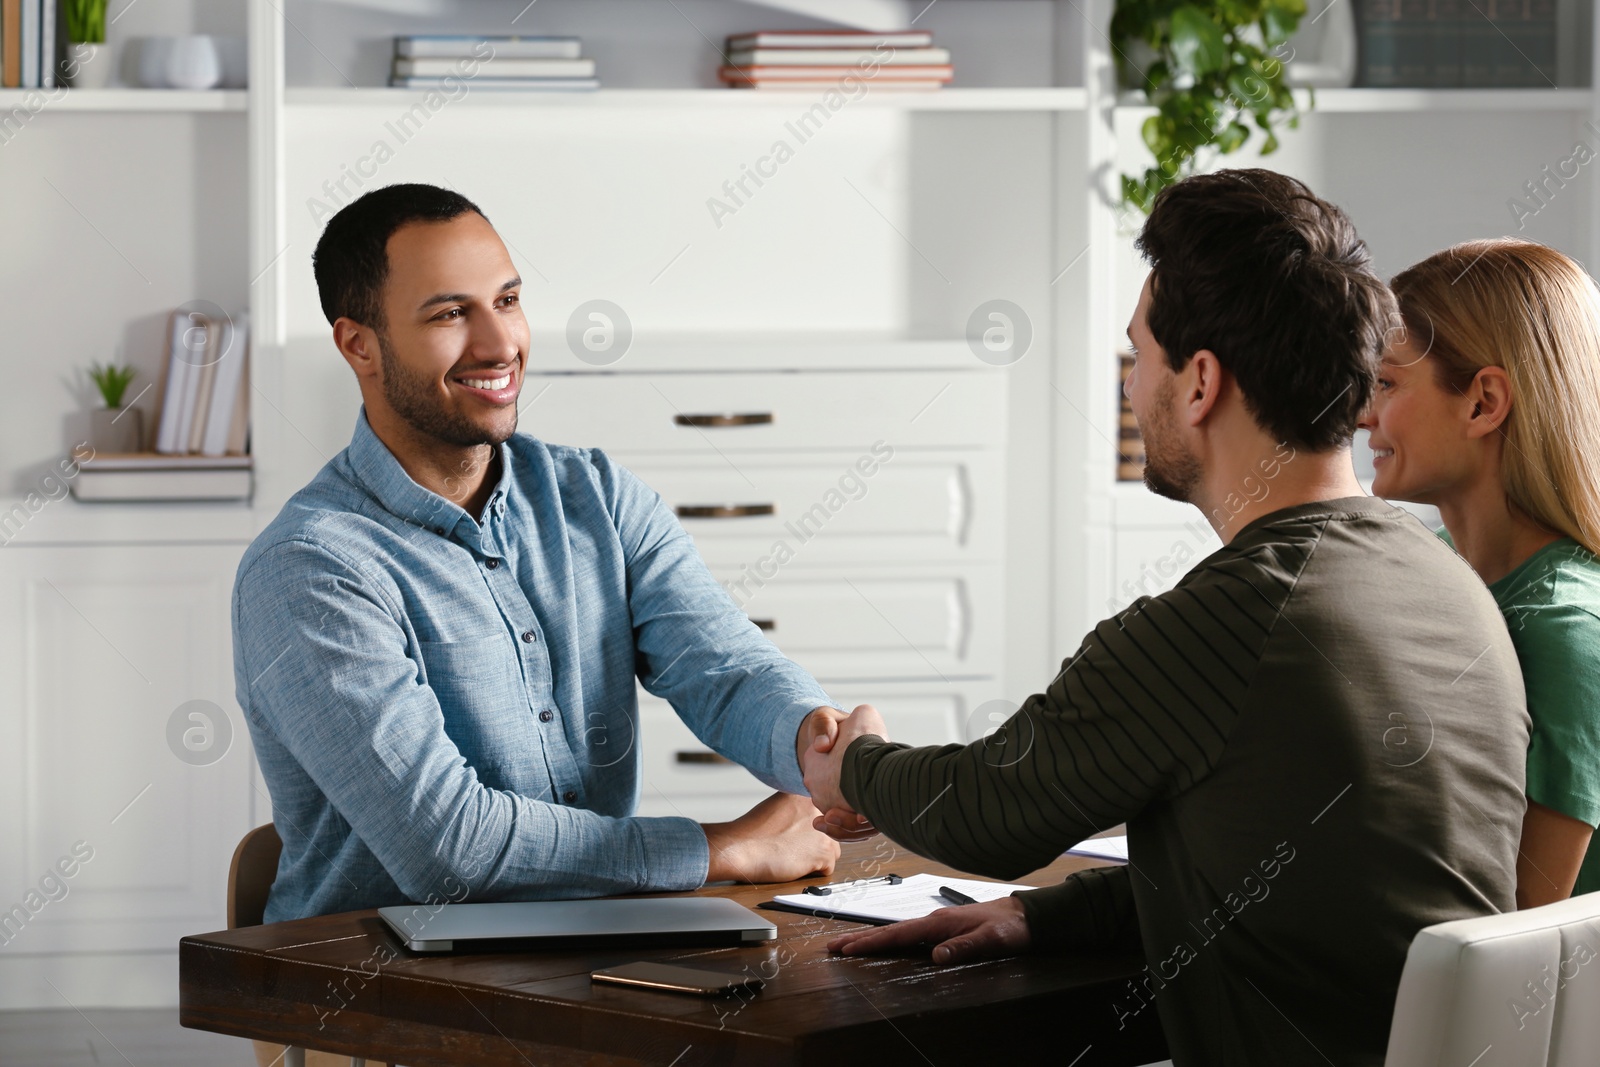 Photo of Notary shaking hands with client in office